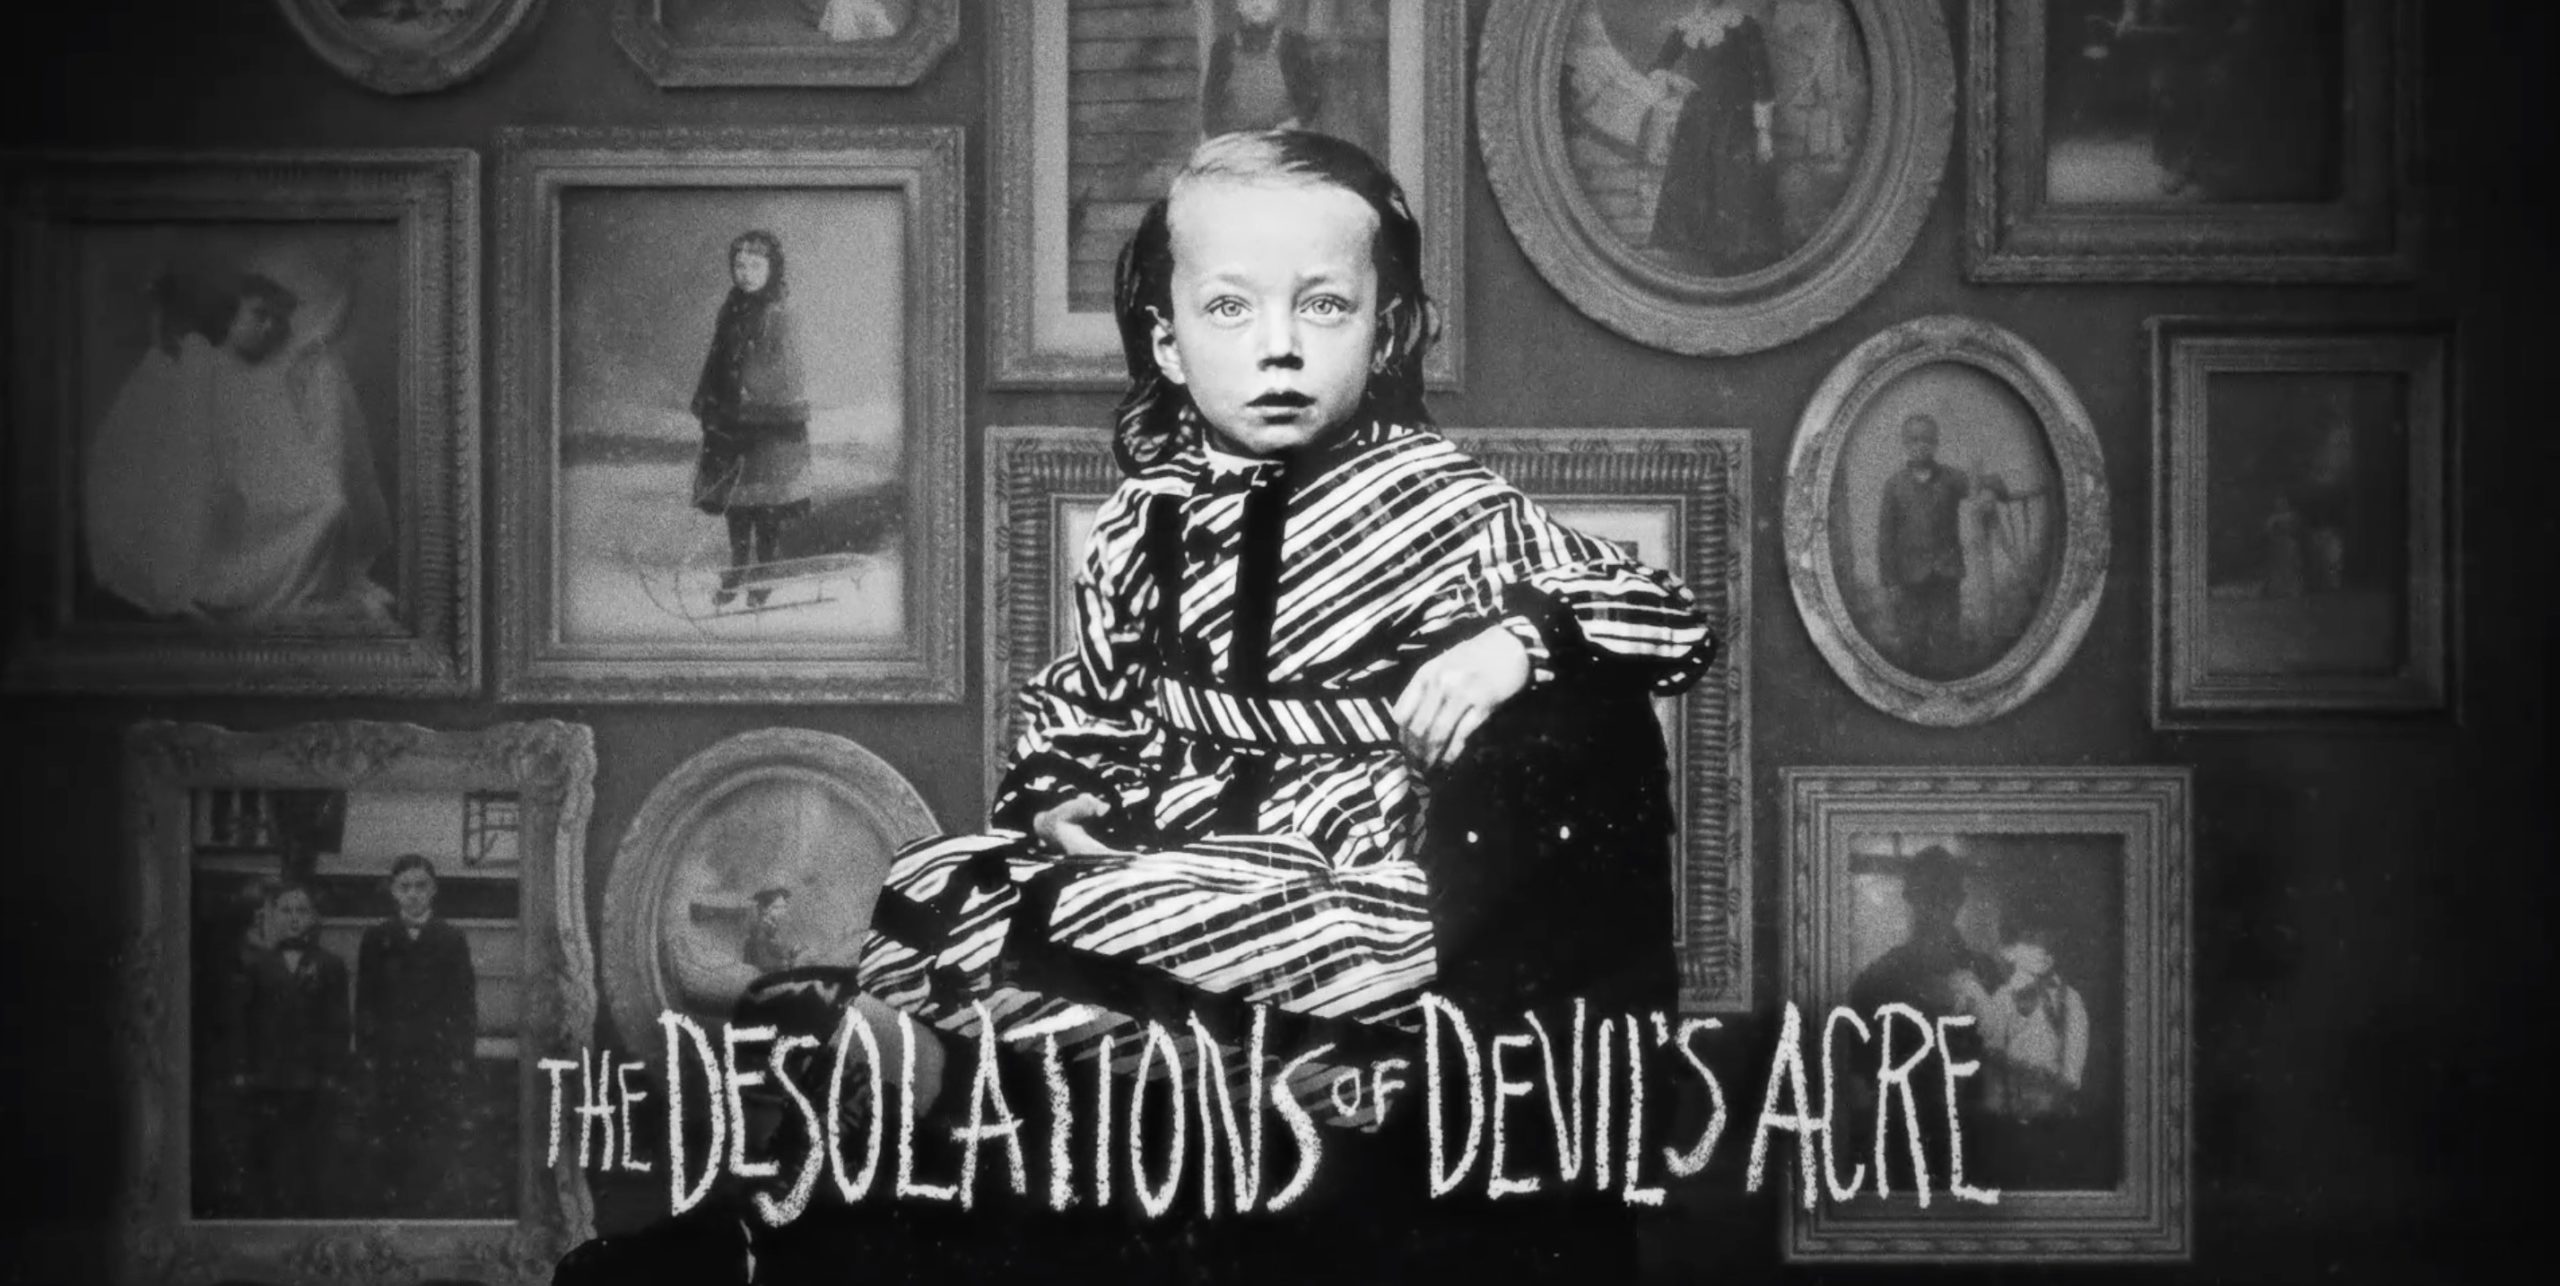 See the trailer for The Desolations of Devil's Acre by Ransom Riggs!